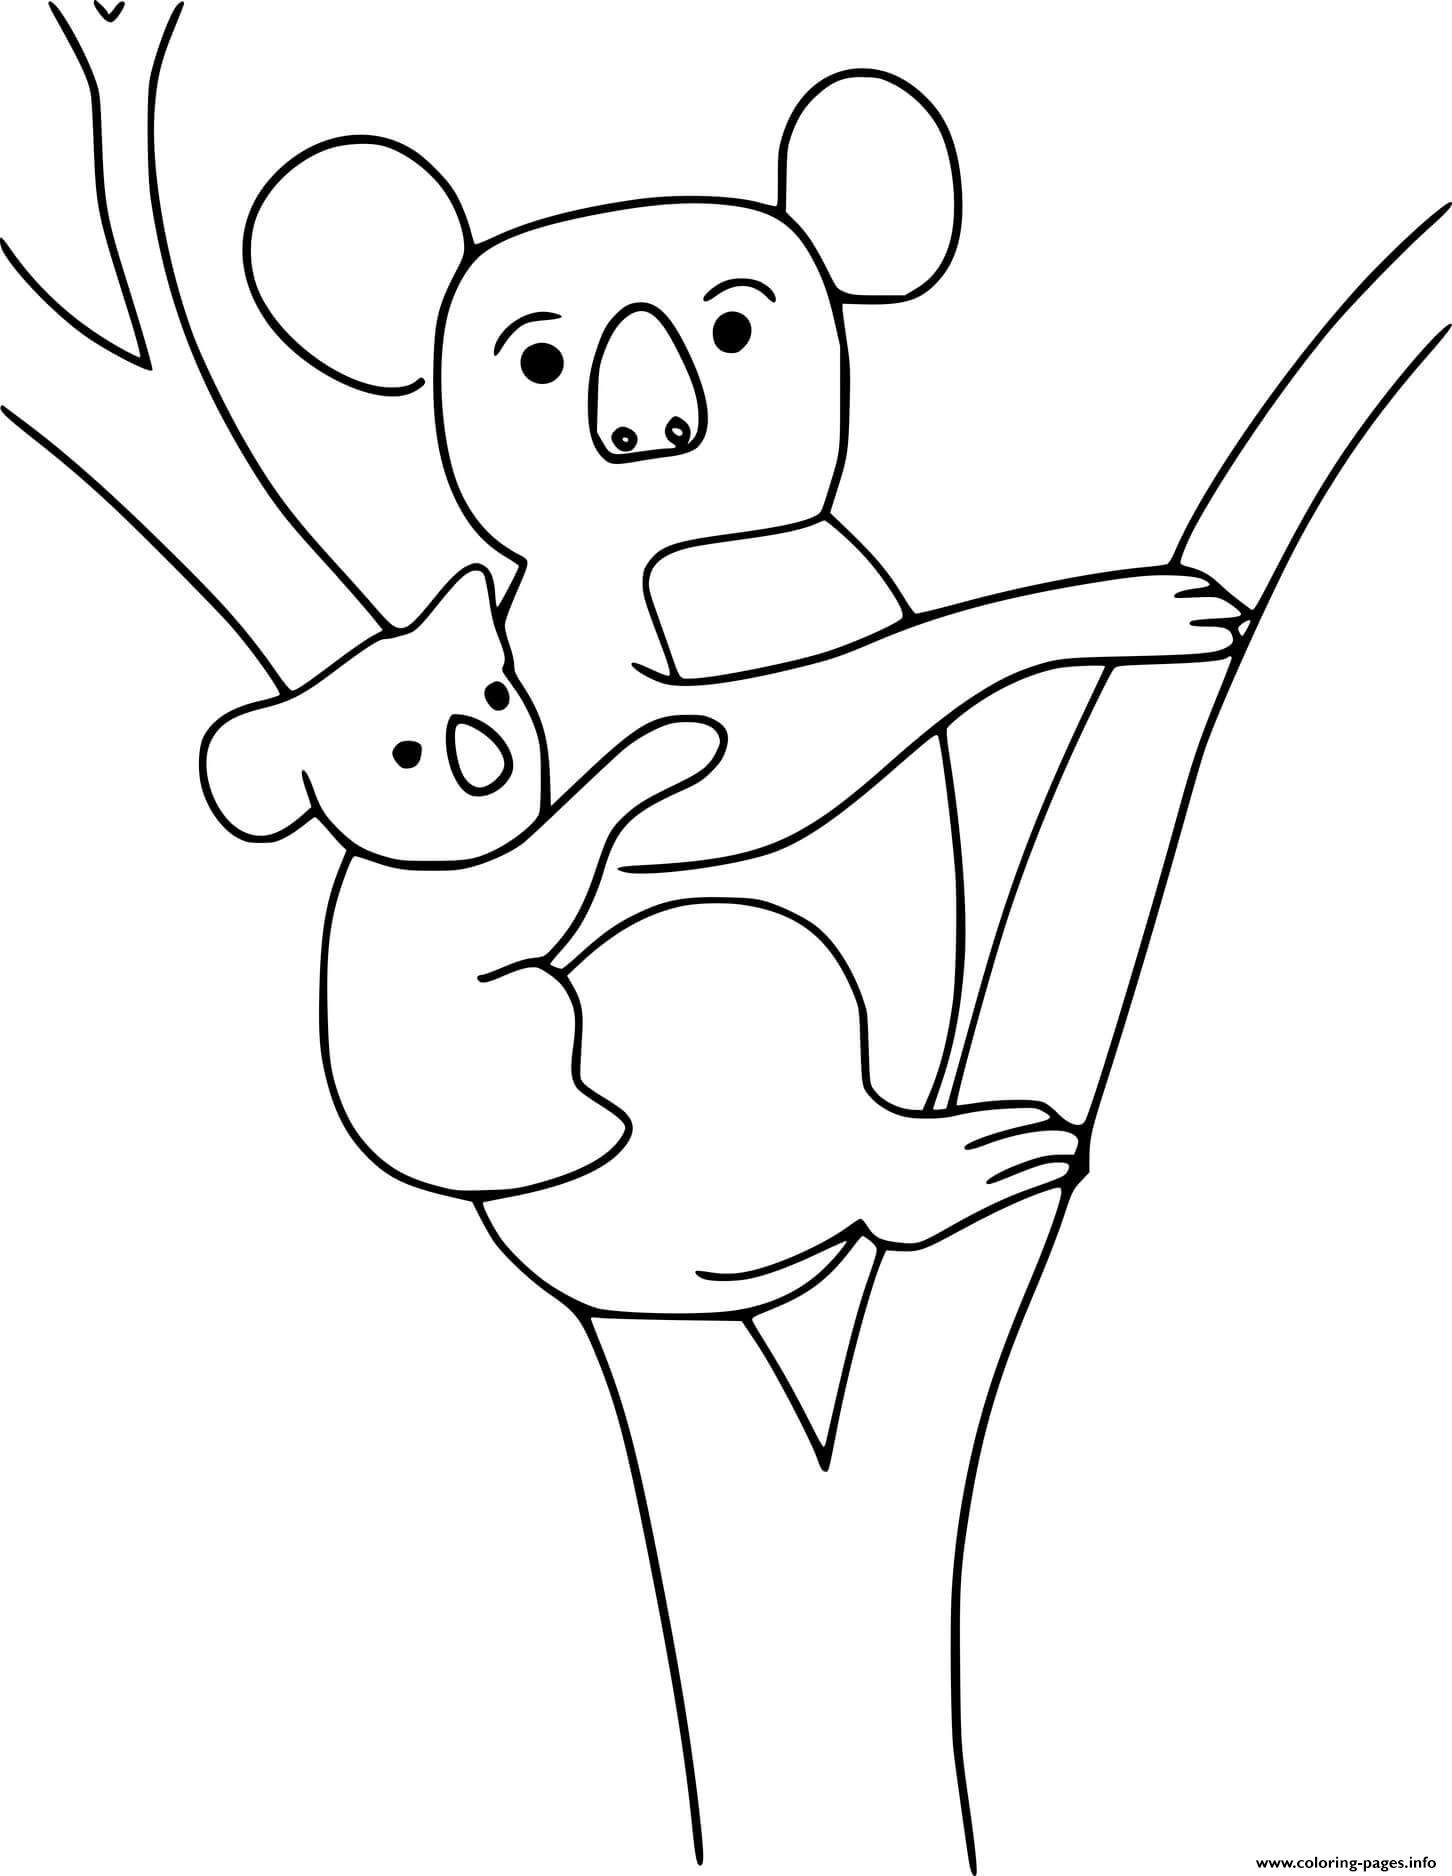 Koala And Baby On The Tree coloring